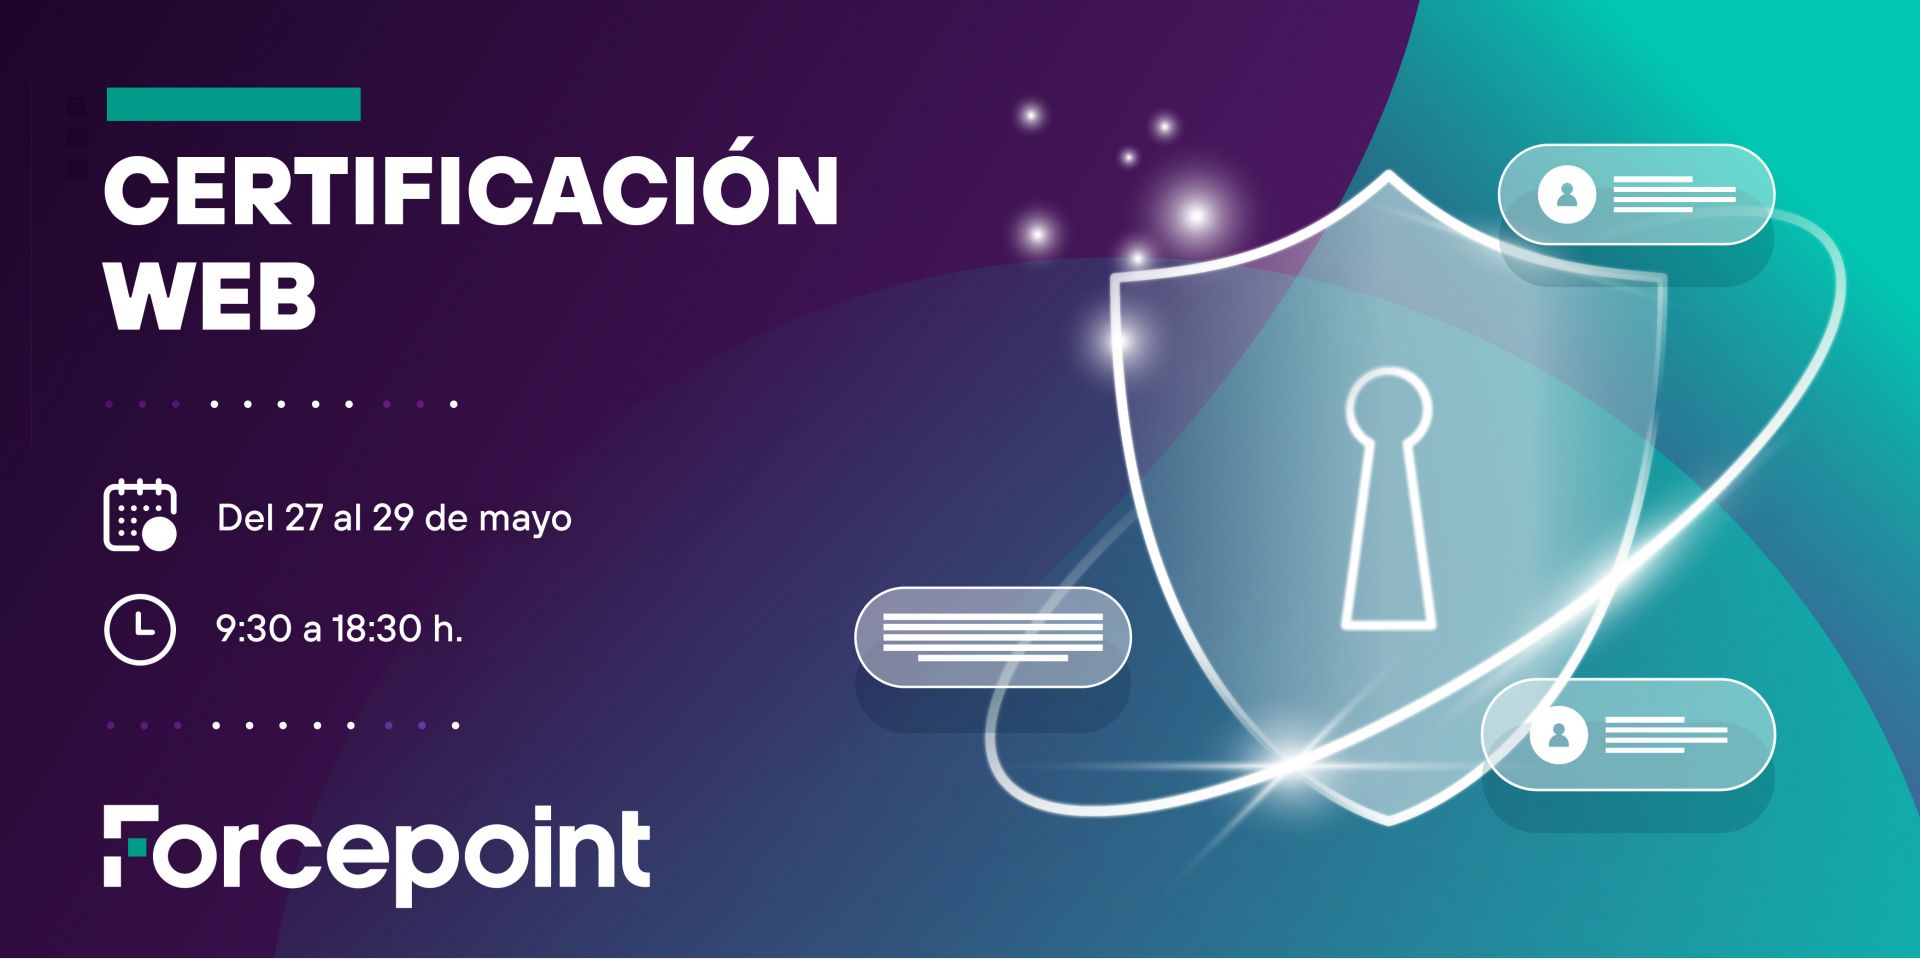 CERTIFICACIÓN WEB FORCEPOINT